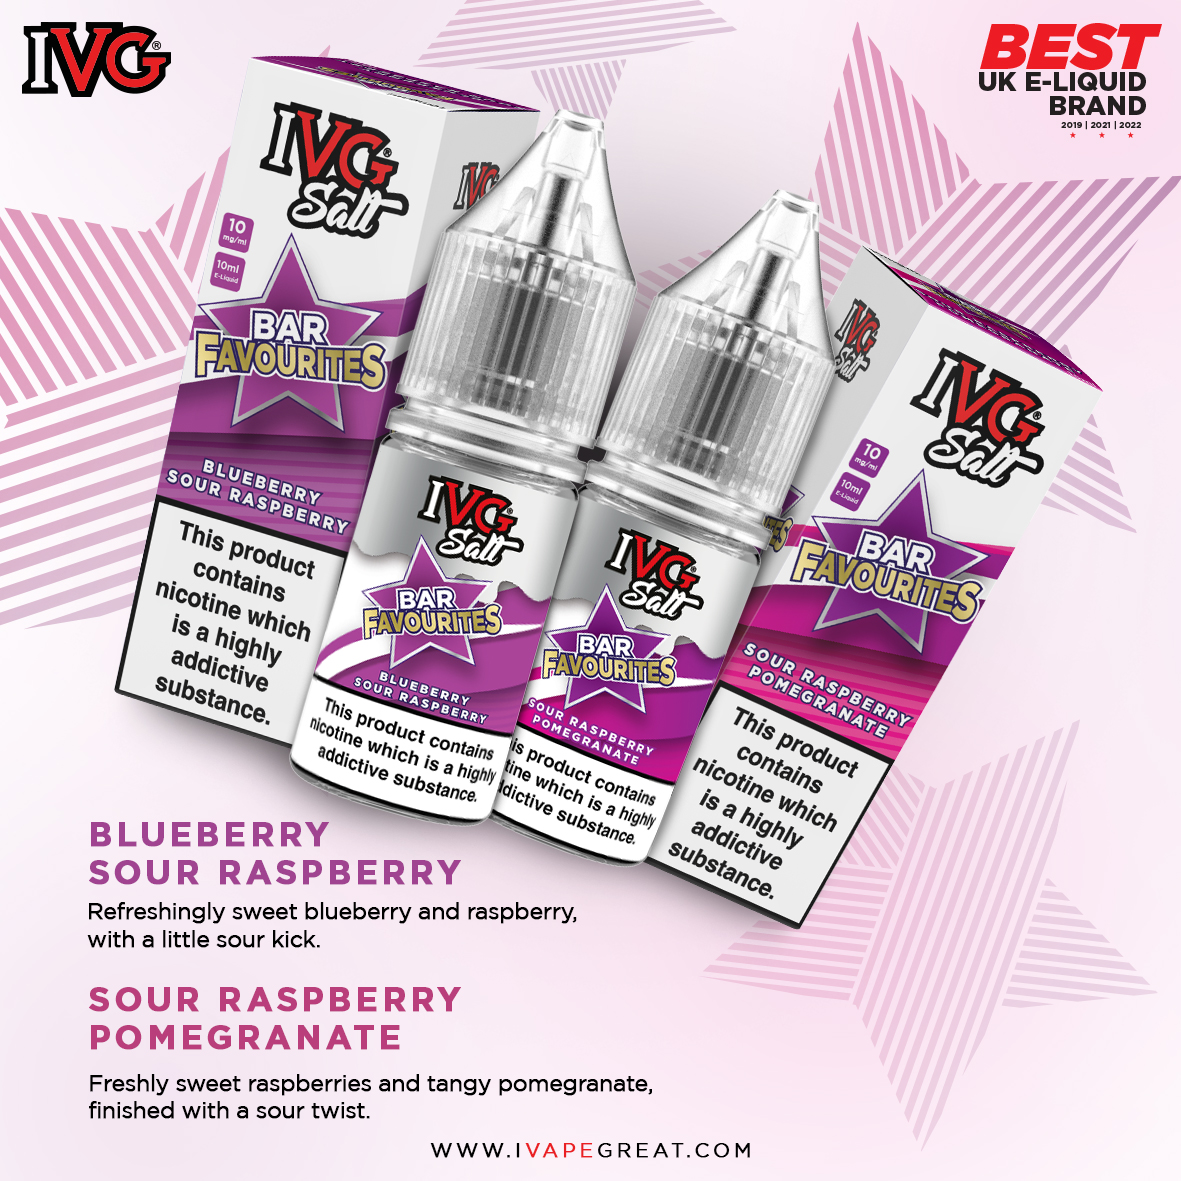 Fancy a little sour kick? 
#BarFavourites Salts features two refreshingly sweet flavours with a little sour kick!
Blueberry Sour Raspberry and Sour Raspberry Pomegranate are available now. 😍

#ivapegreat #ivg #ivgsalts #ivgeliquids #no2minors